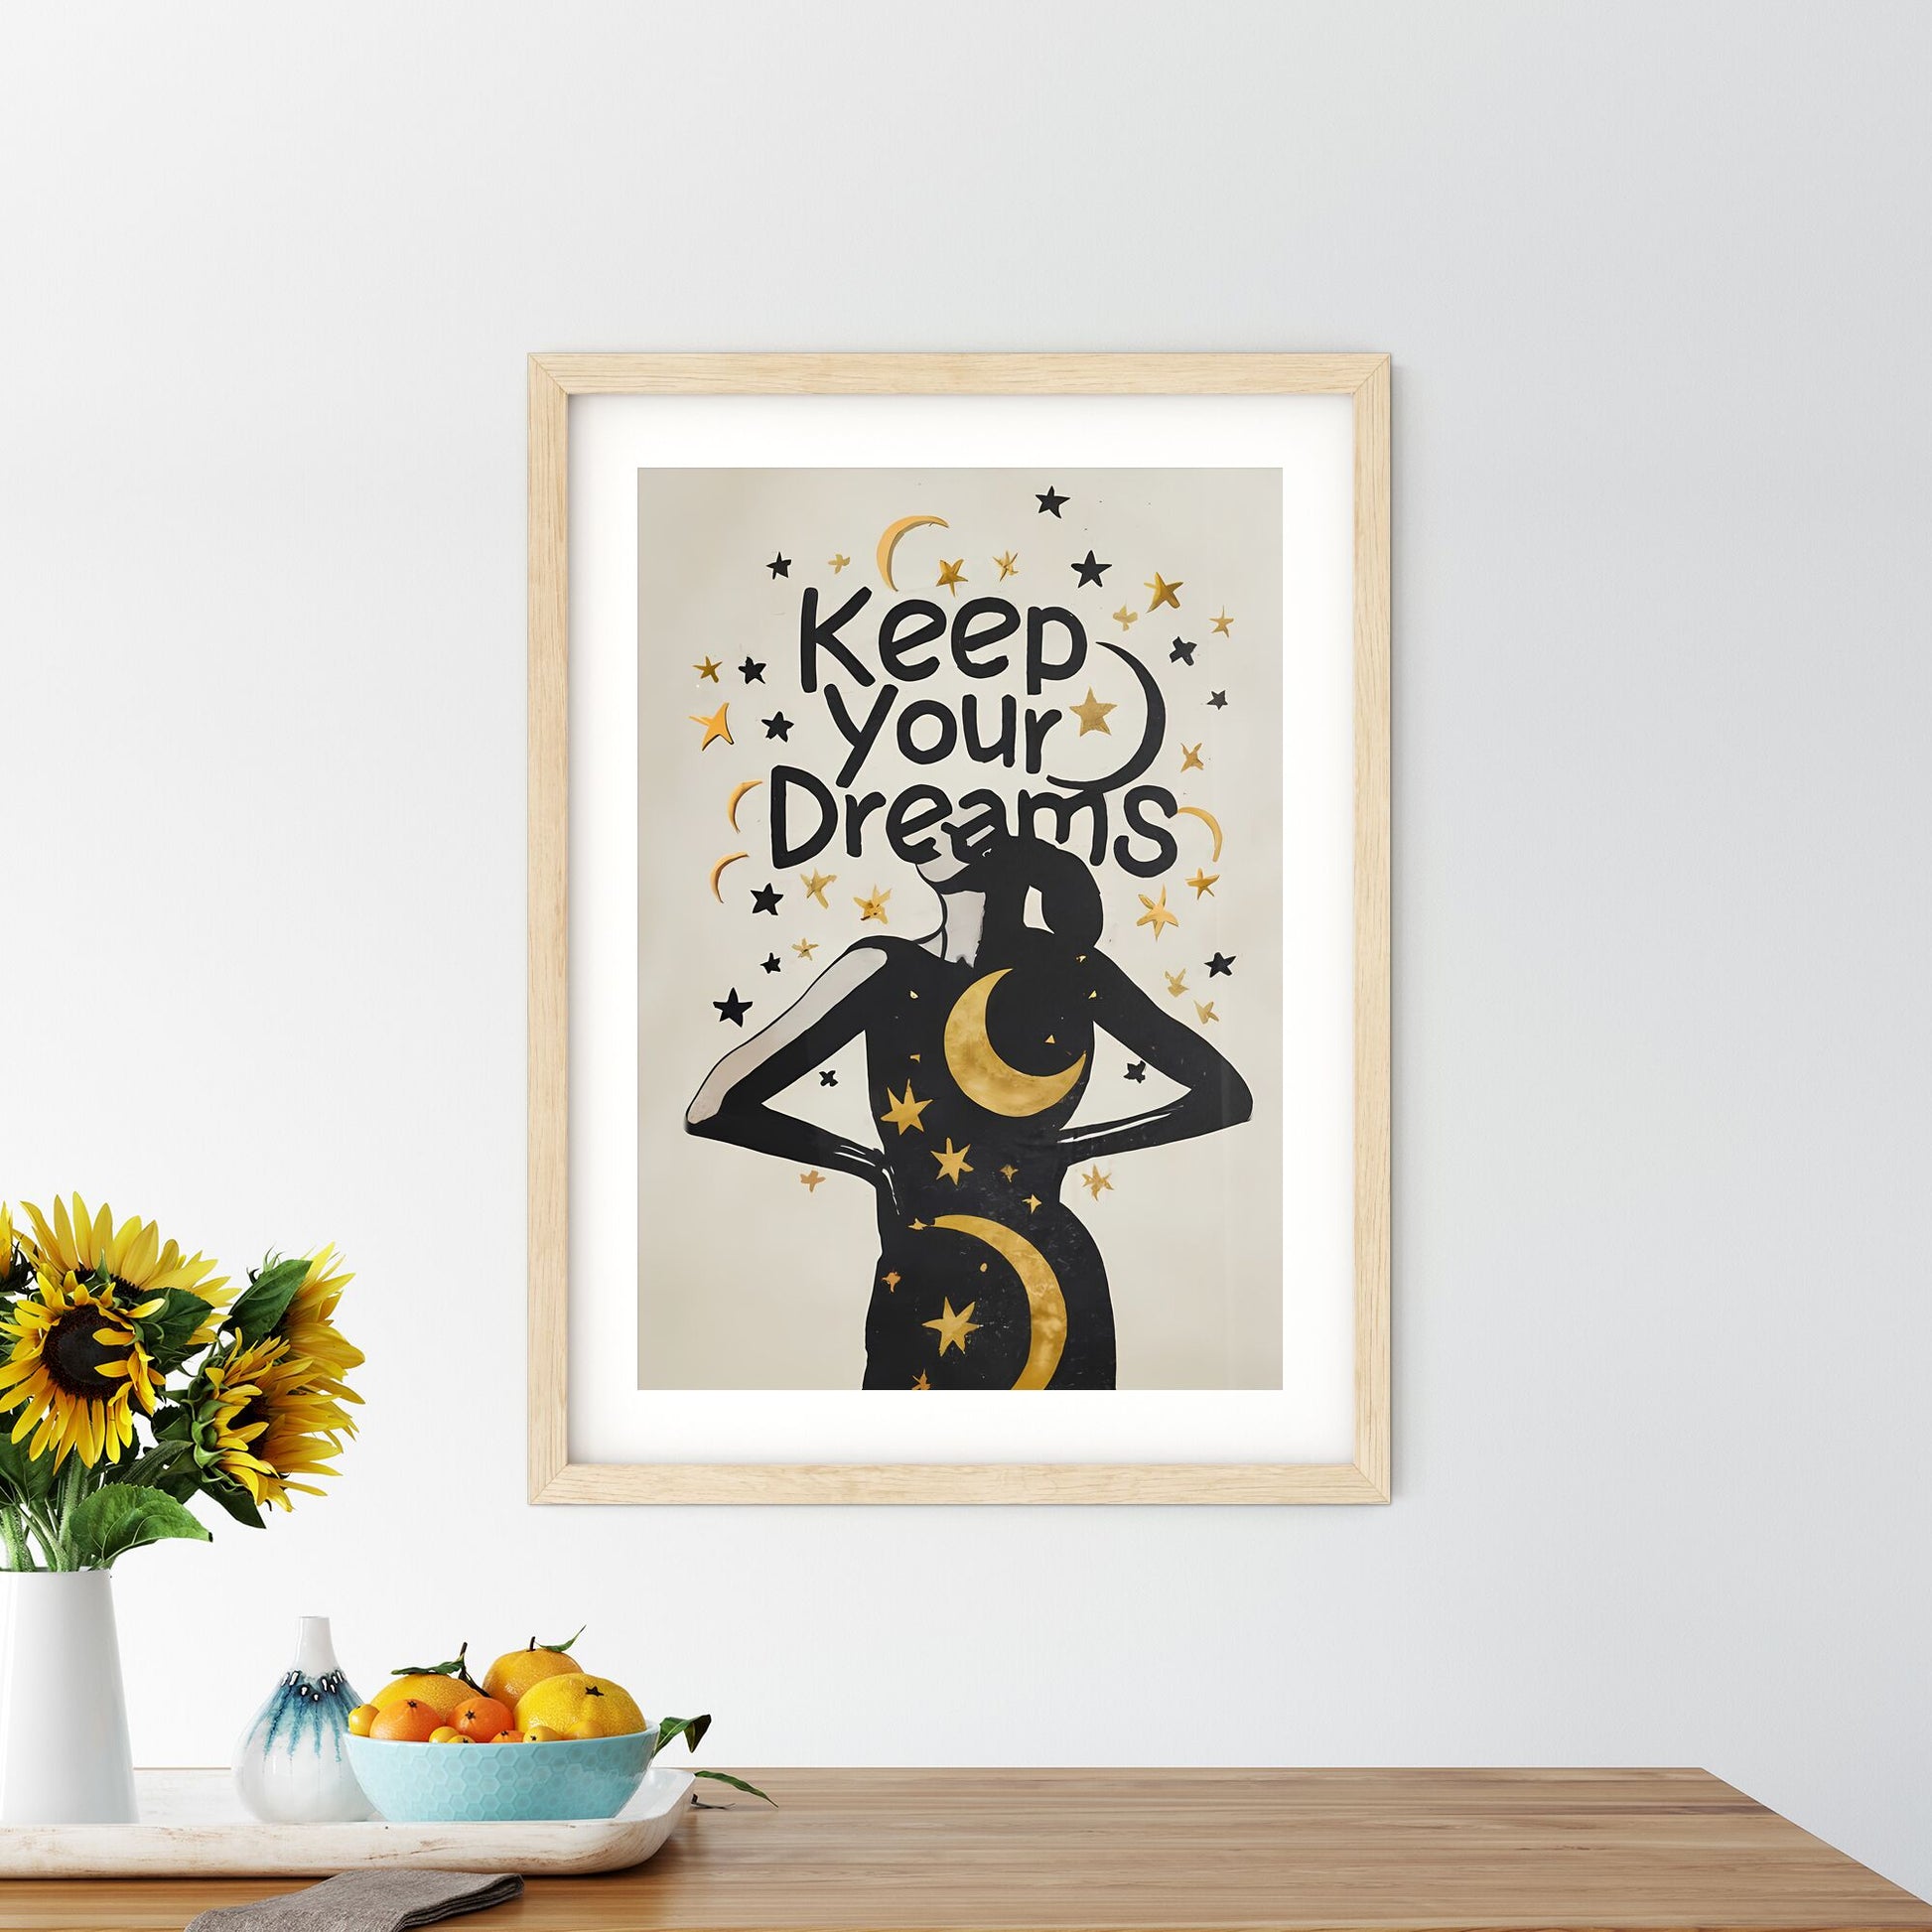 Keep Your Dreams - A Drawing Of A Woman With A Moon And Stars Default Title